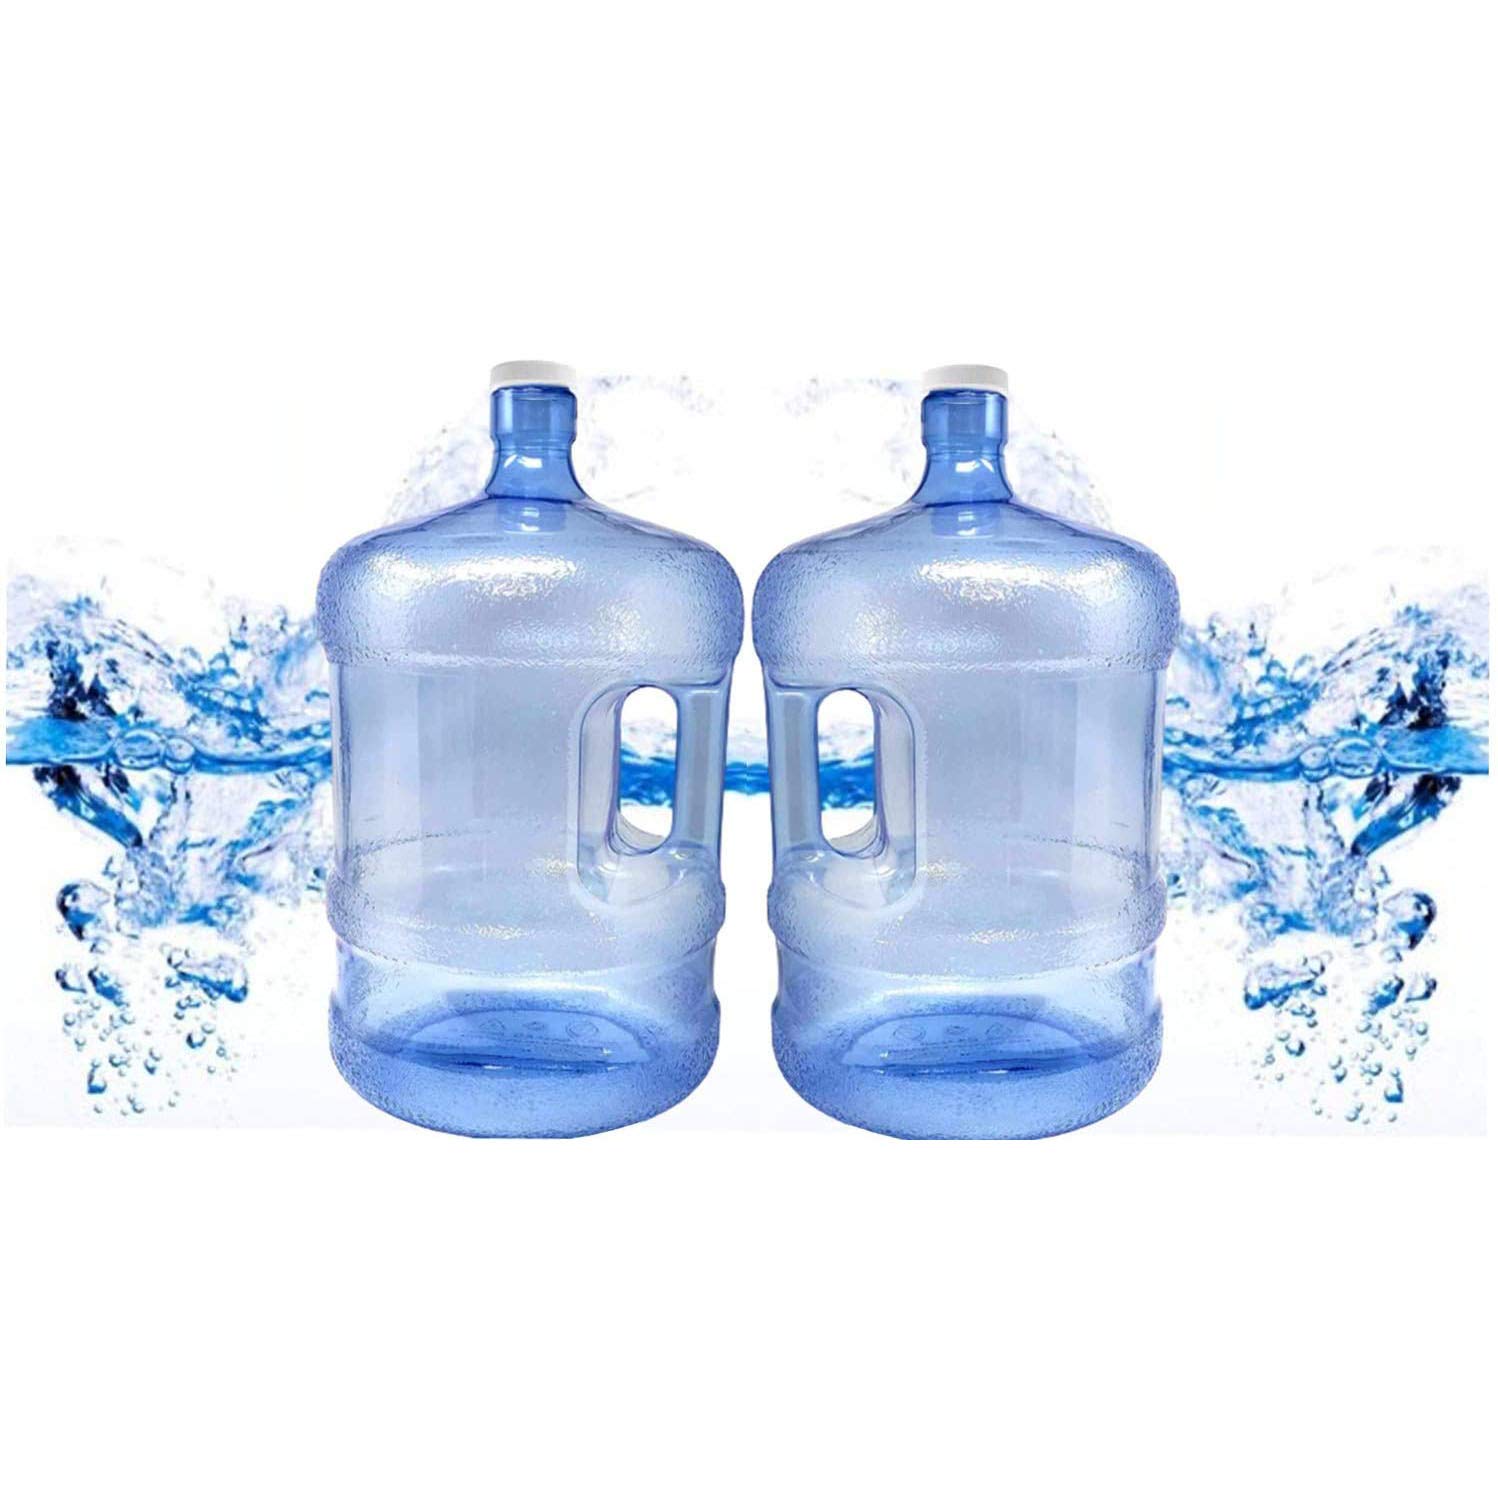 Lavo Home 2 Pack 5 Gallon Plastic Water Bottle Container with Cap & Carrying Handle - BPA Food Grade For Emergency Storage